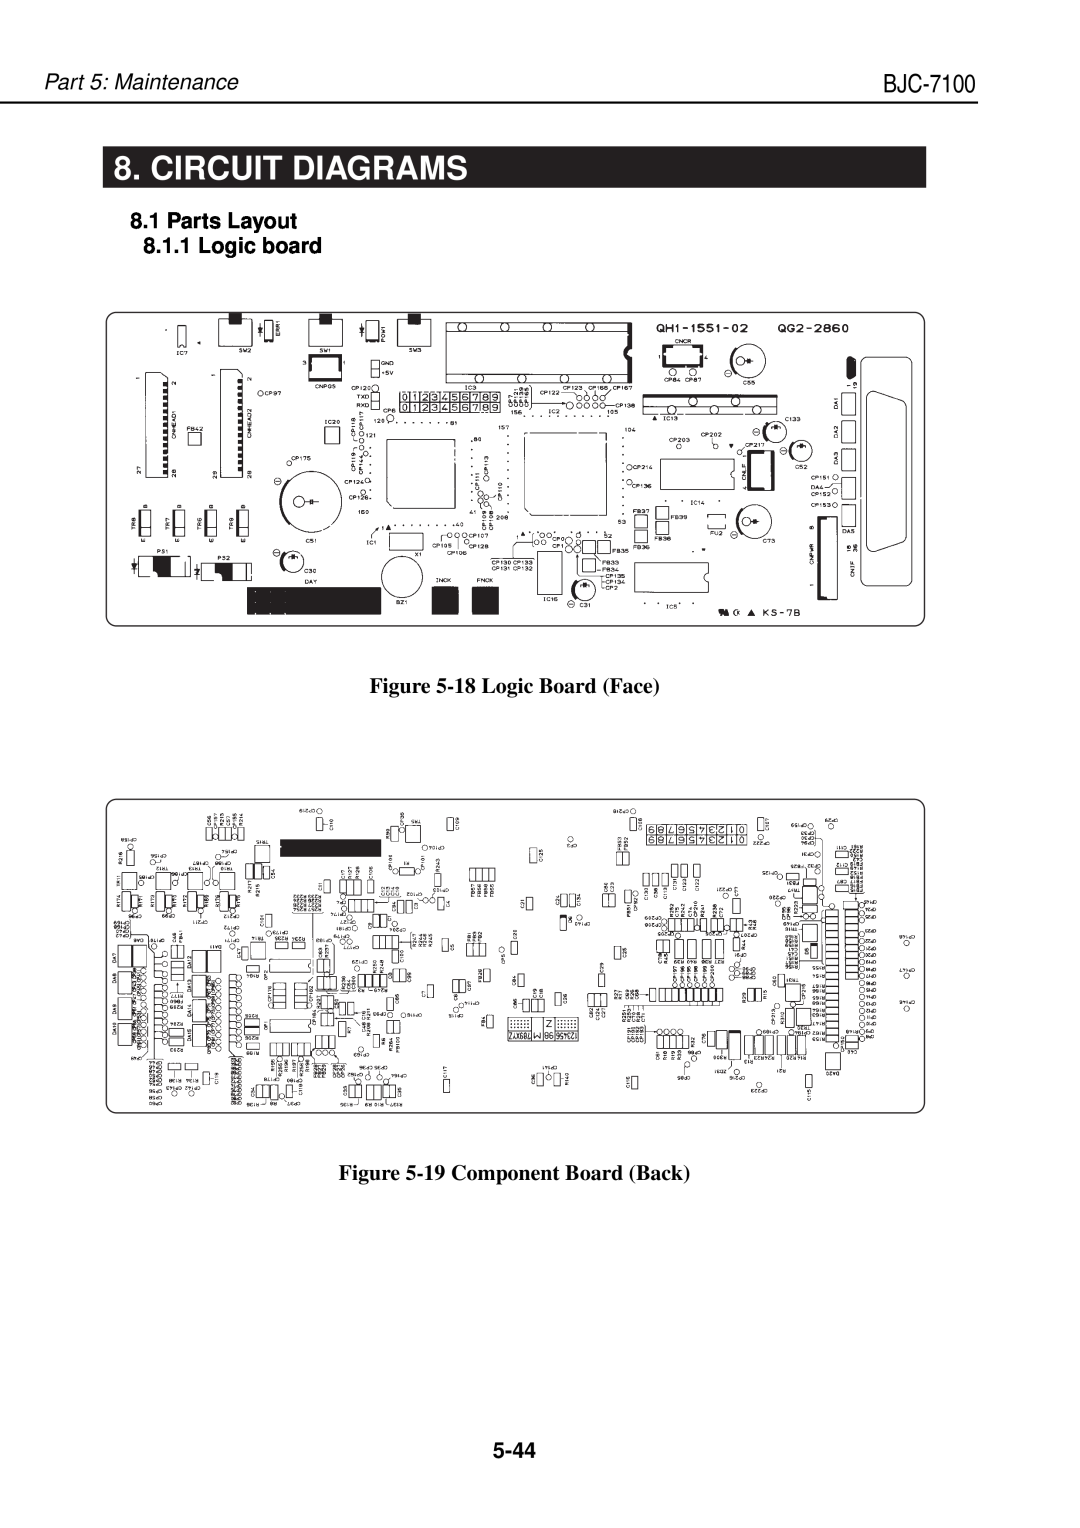 Canon QY8-1360-000 Circuit Diagrams, Parts Layout 8.1.1 Logic board, 18 Logic Board Face -19 Component Board Back, 5-44 